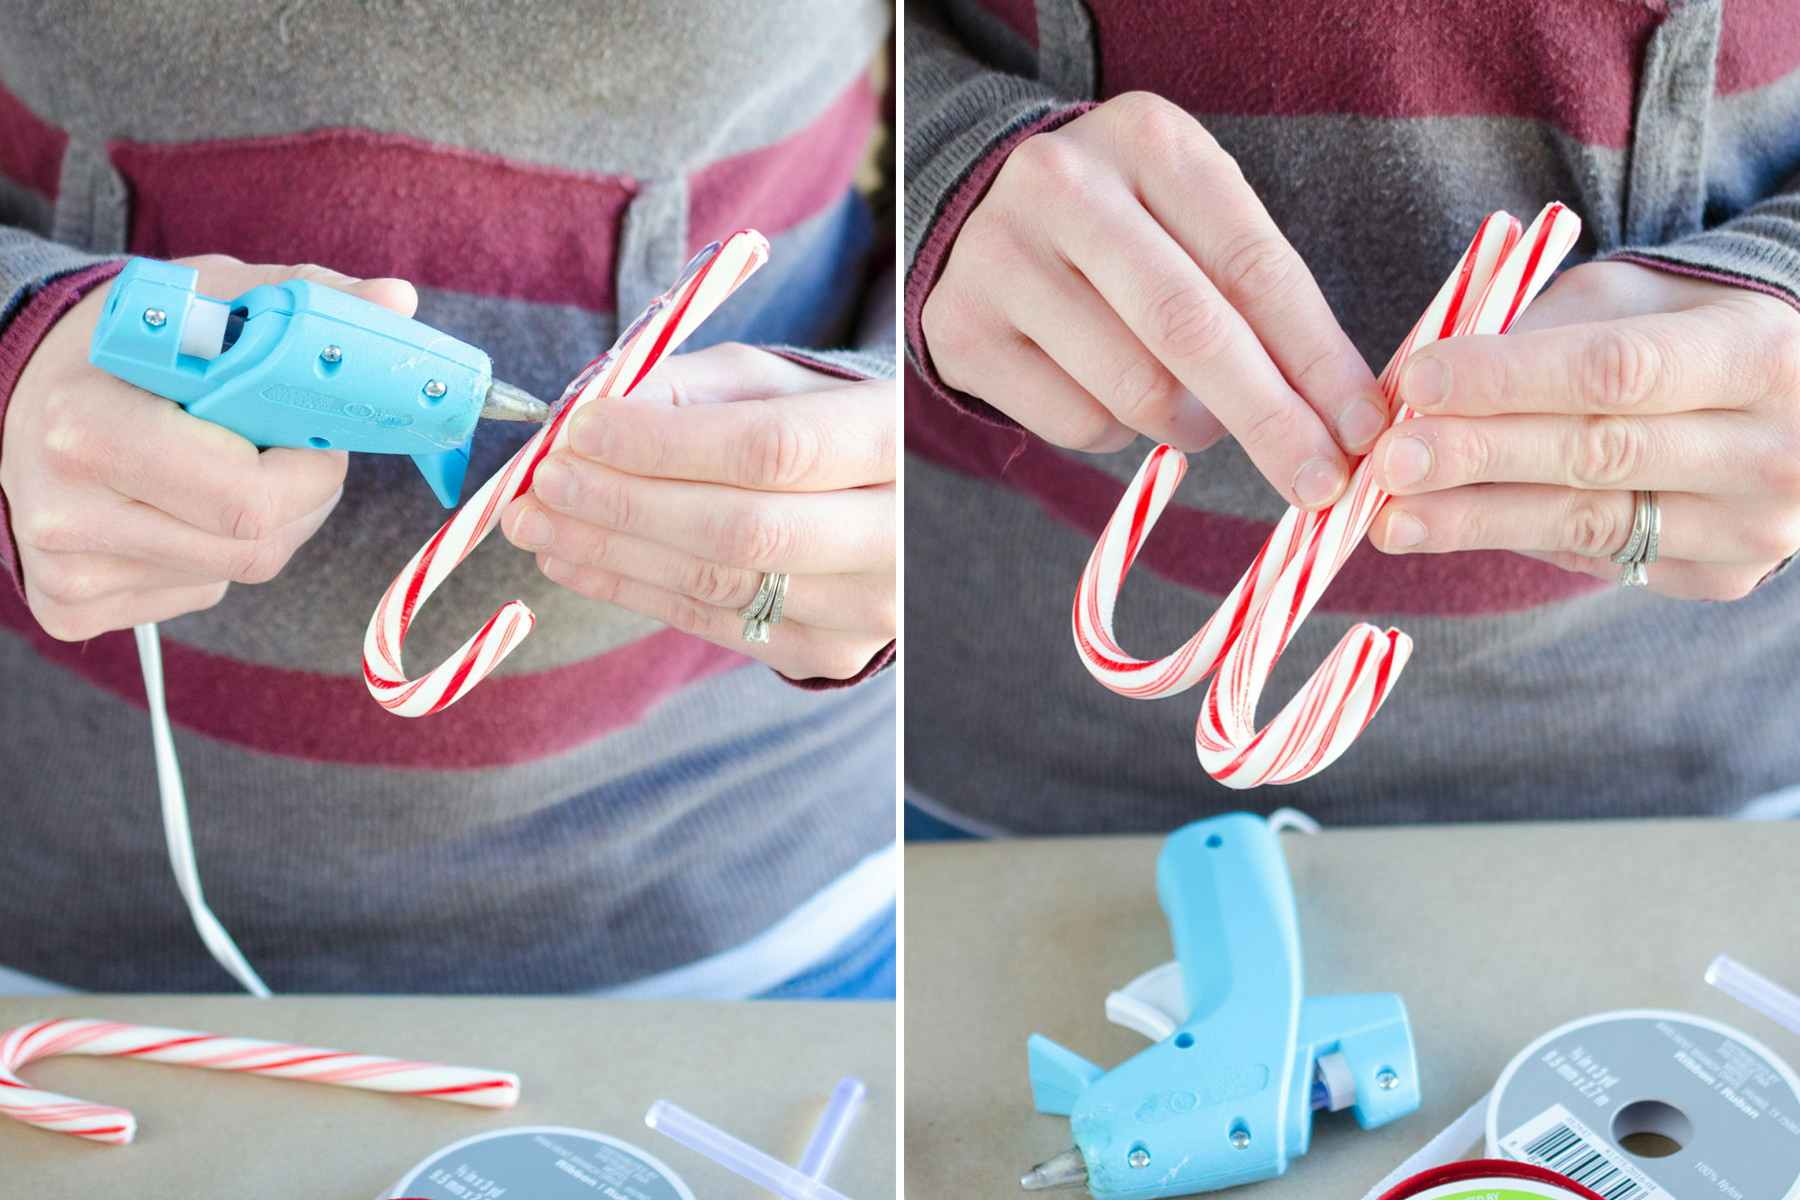 A person using a hot glue gun to attach 3 candy canes together